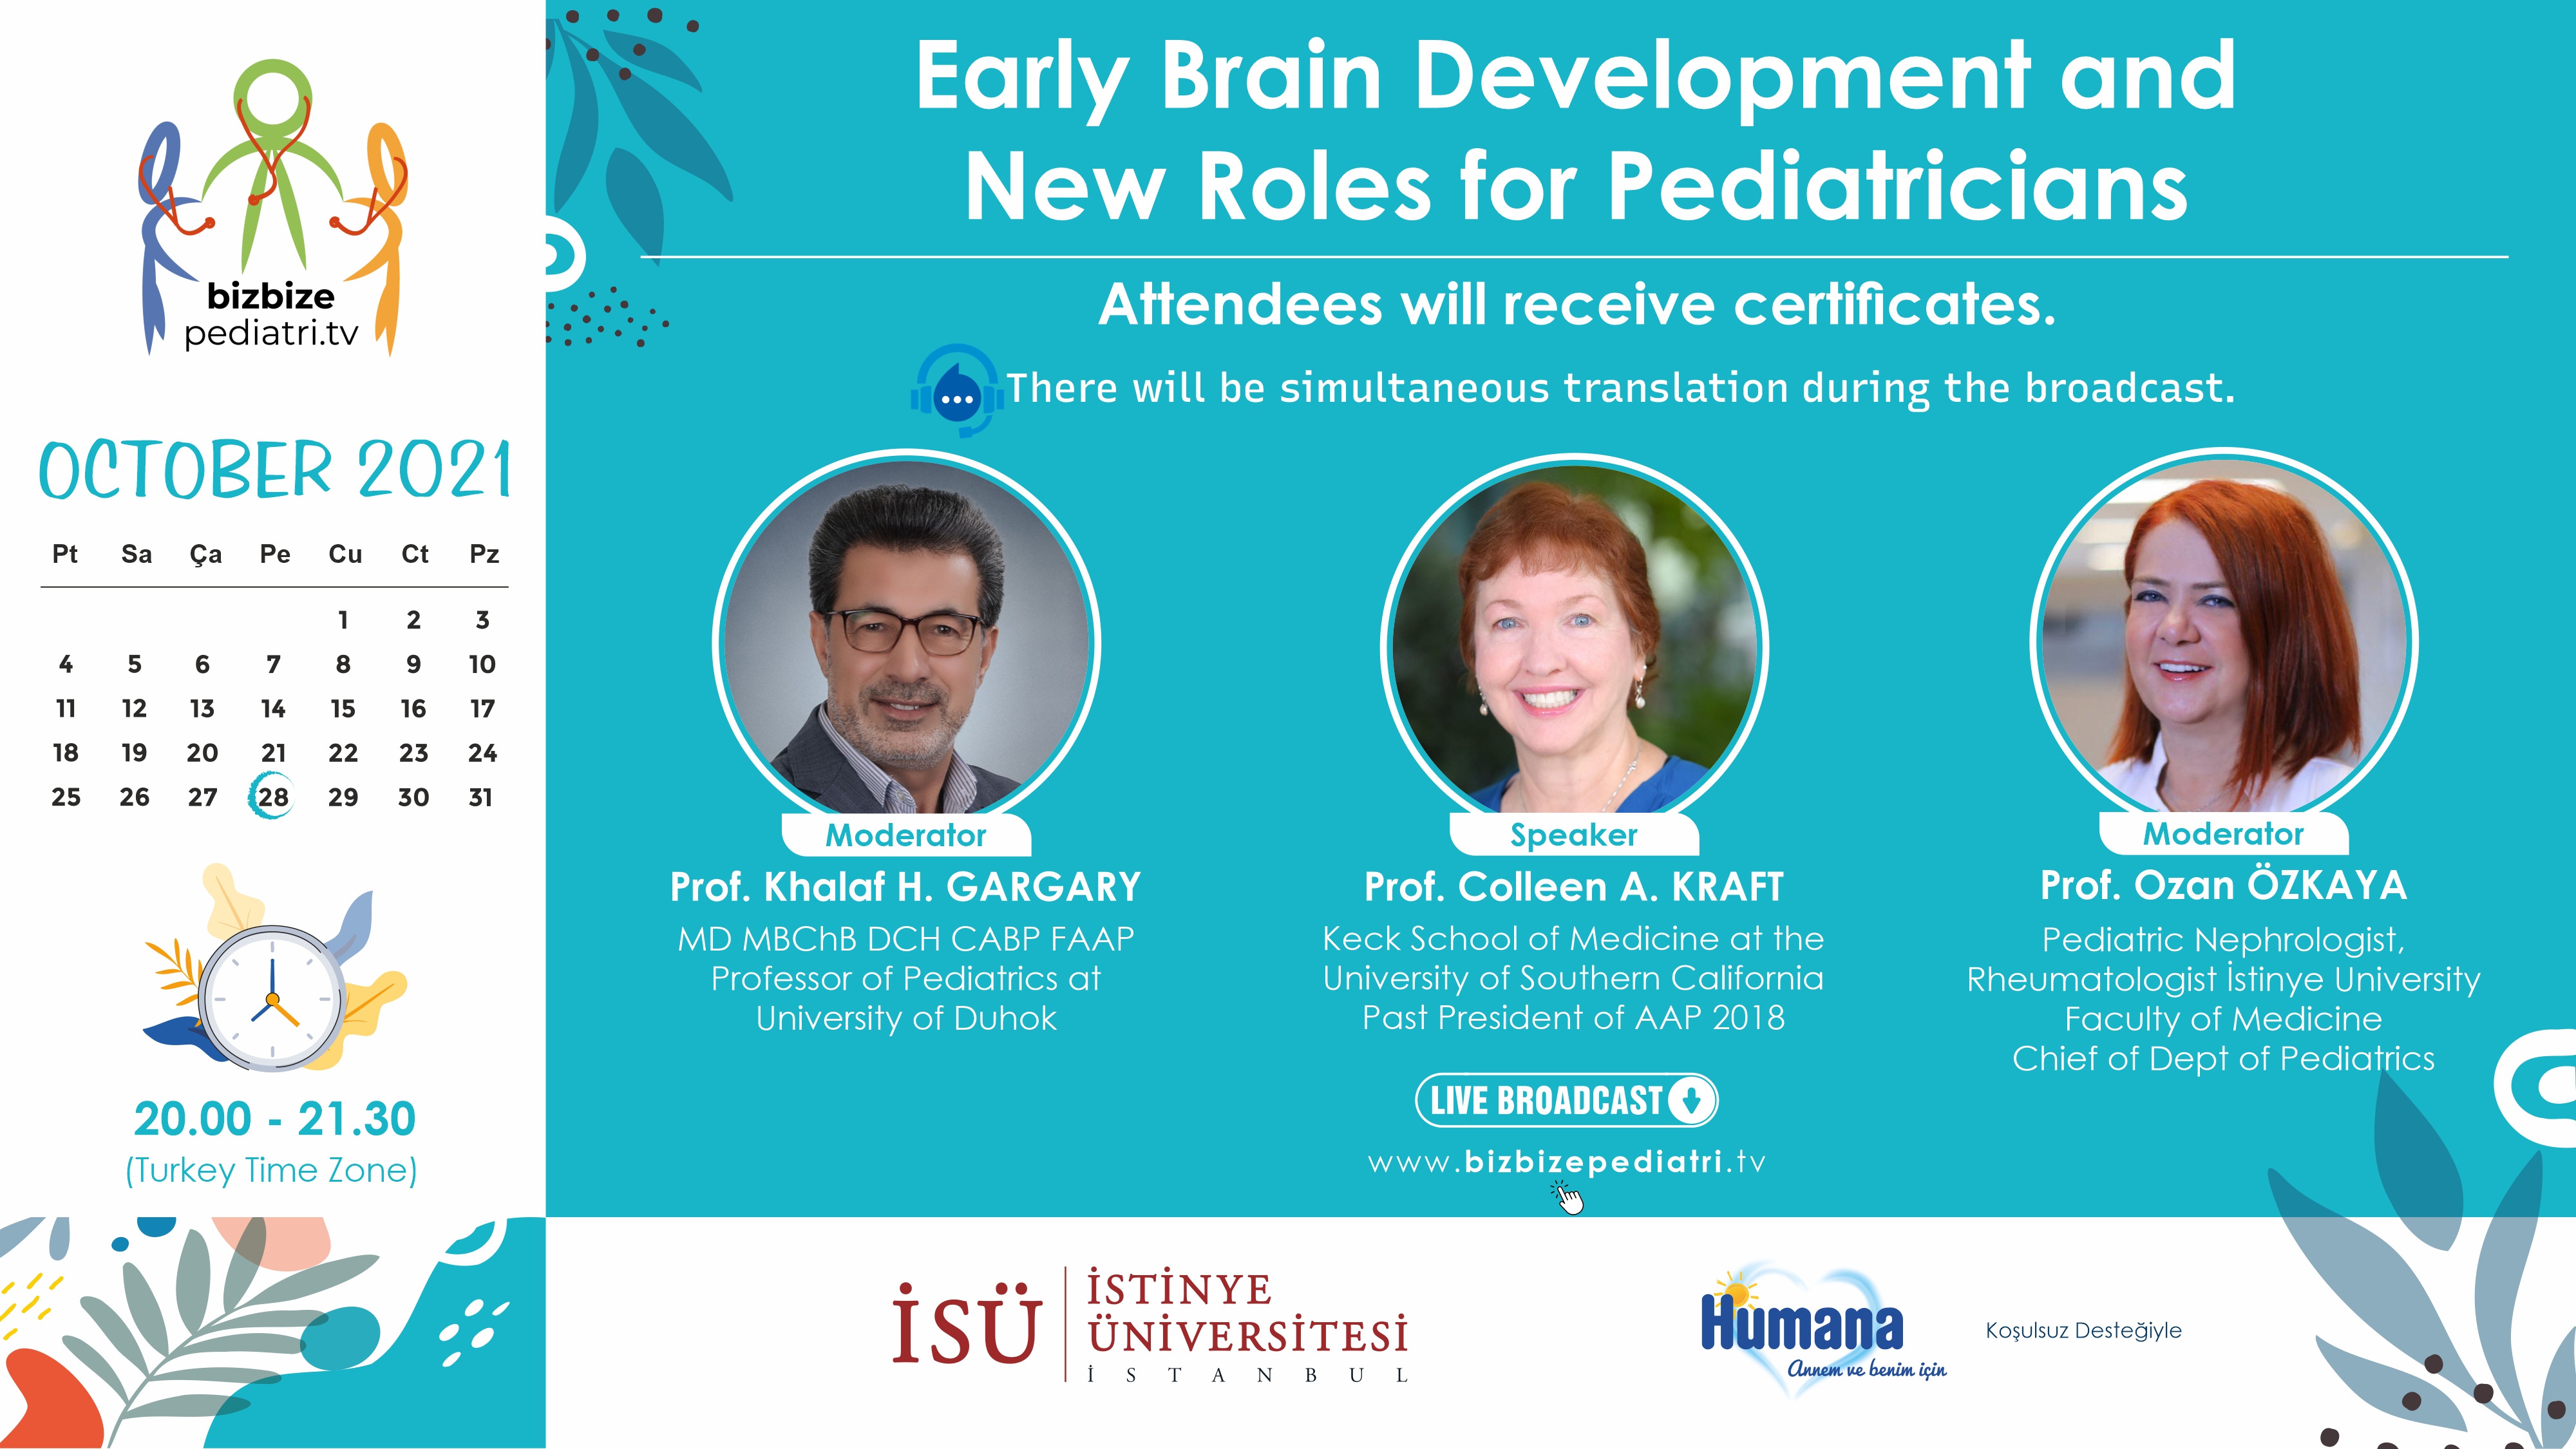 Early Brain Development and New Roles for Pediatricians